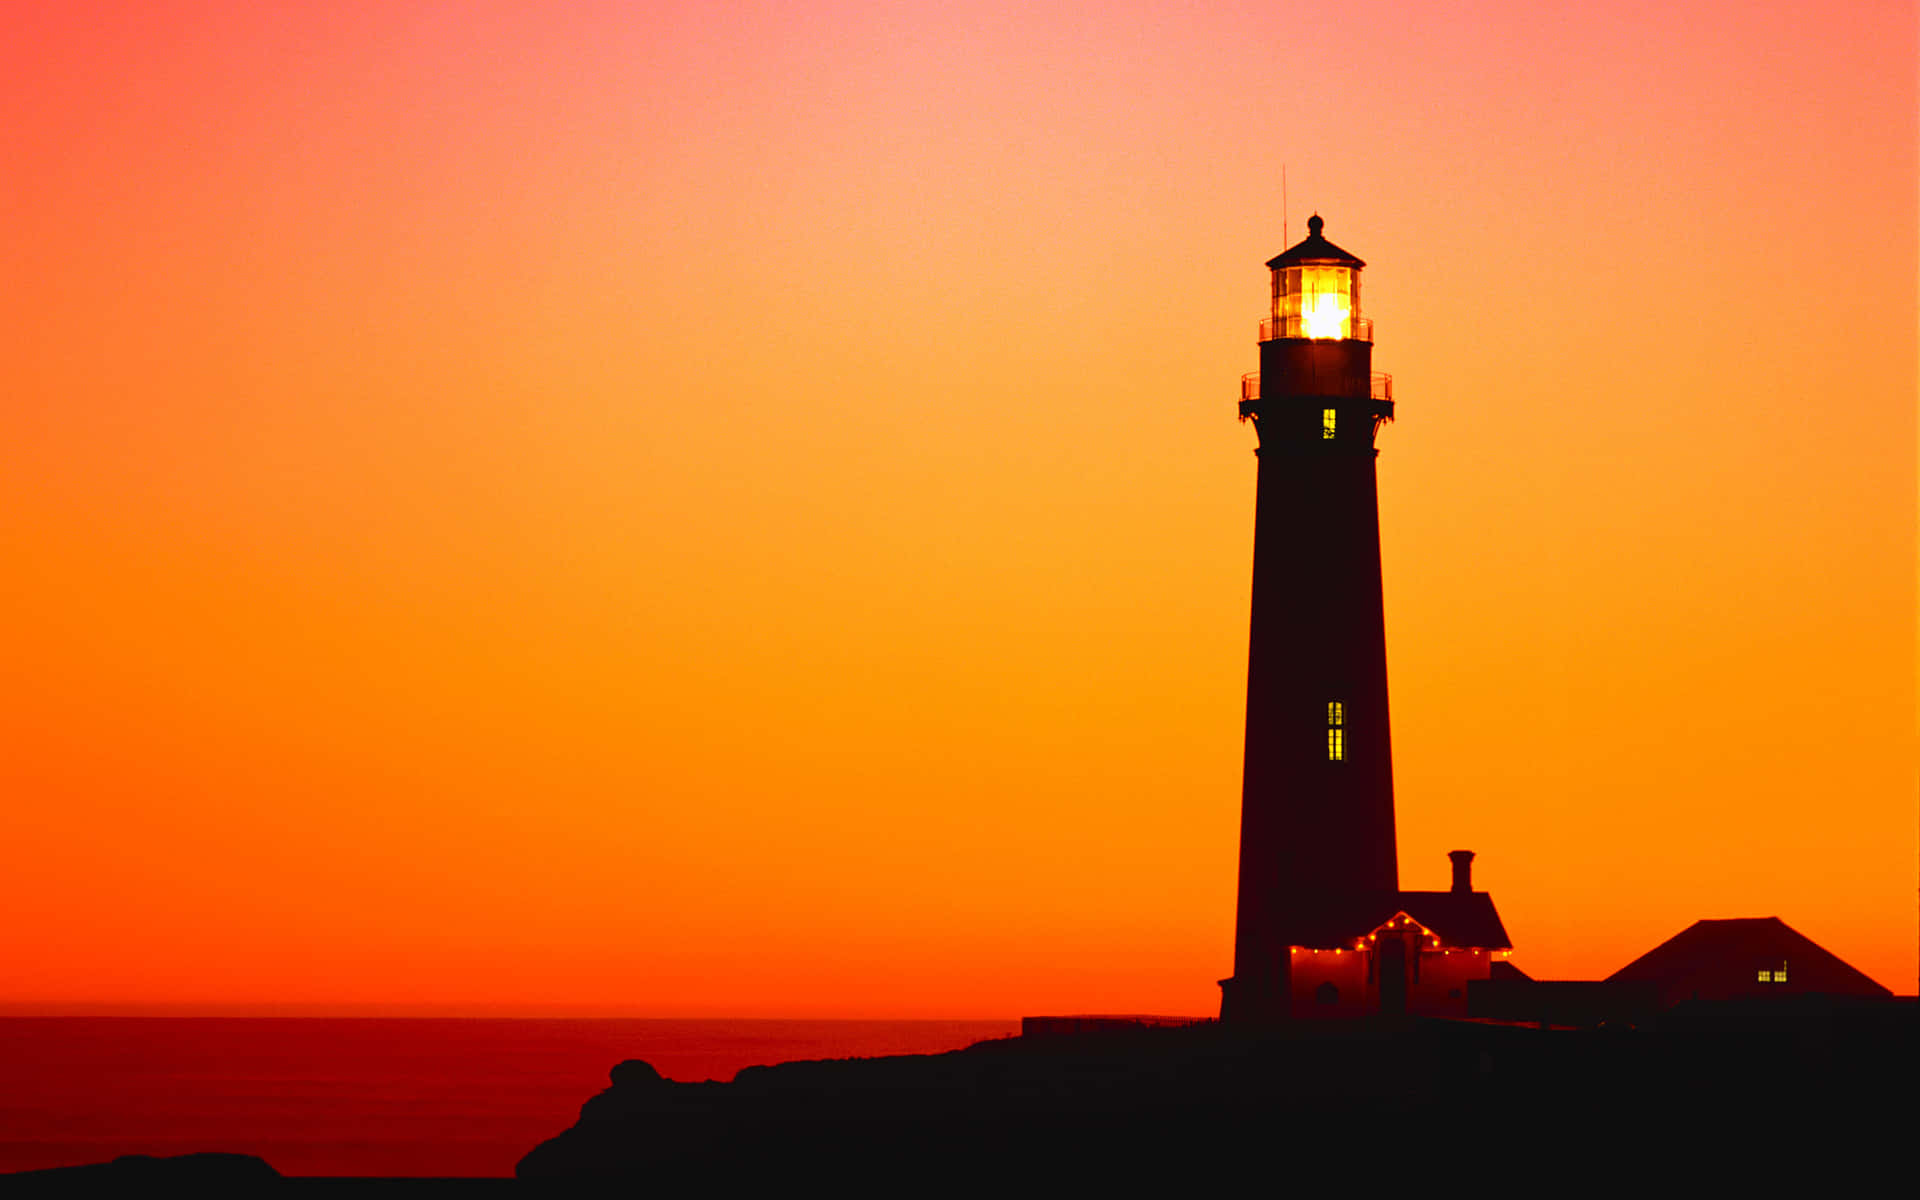 Find your peace at this tranquil seaside lighthouse.